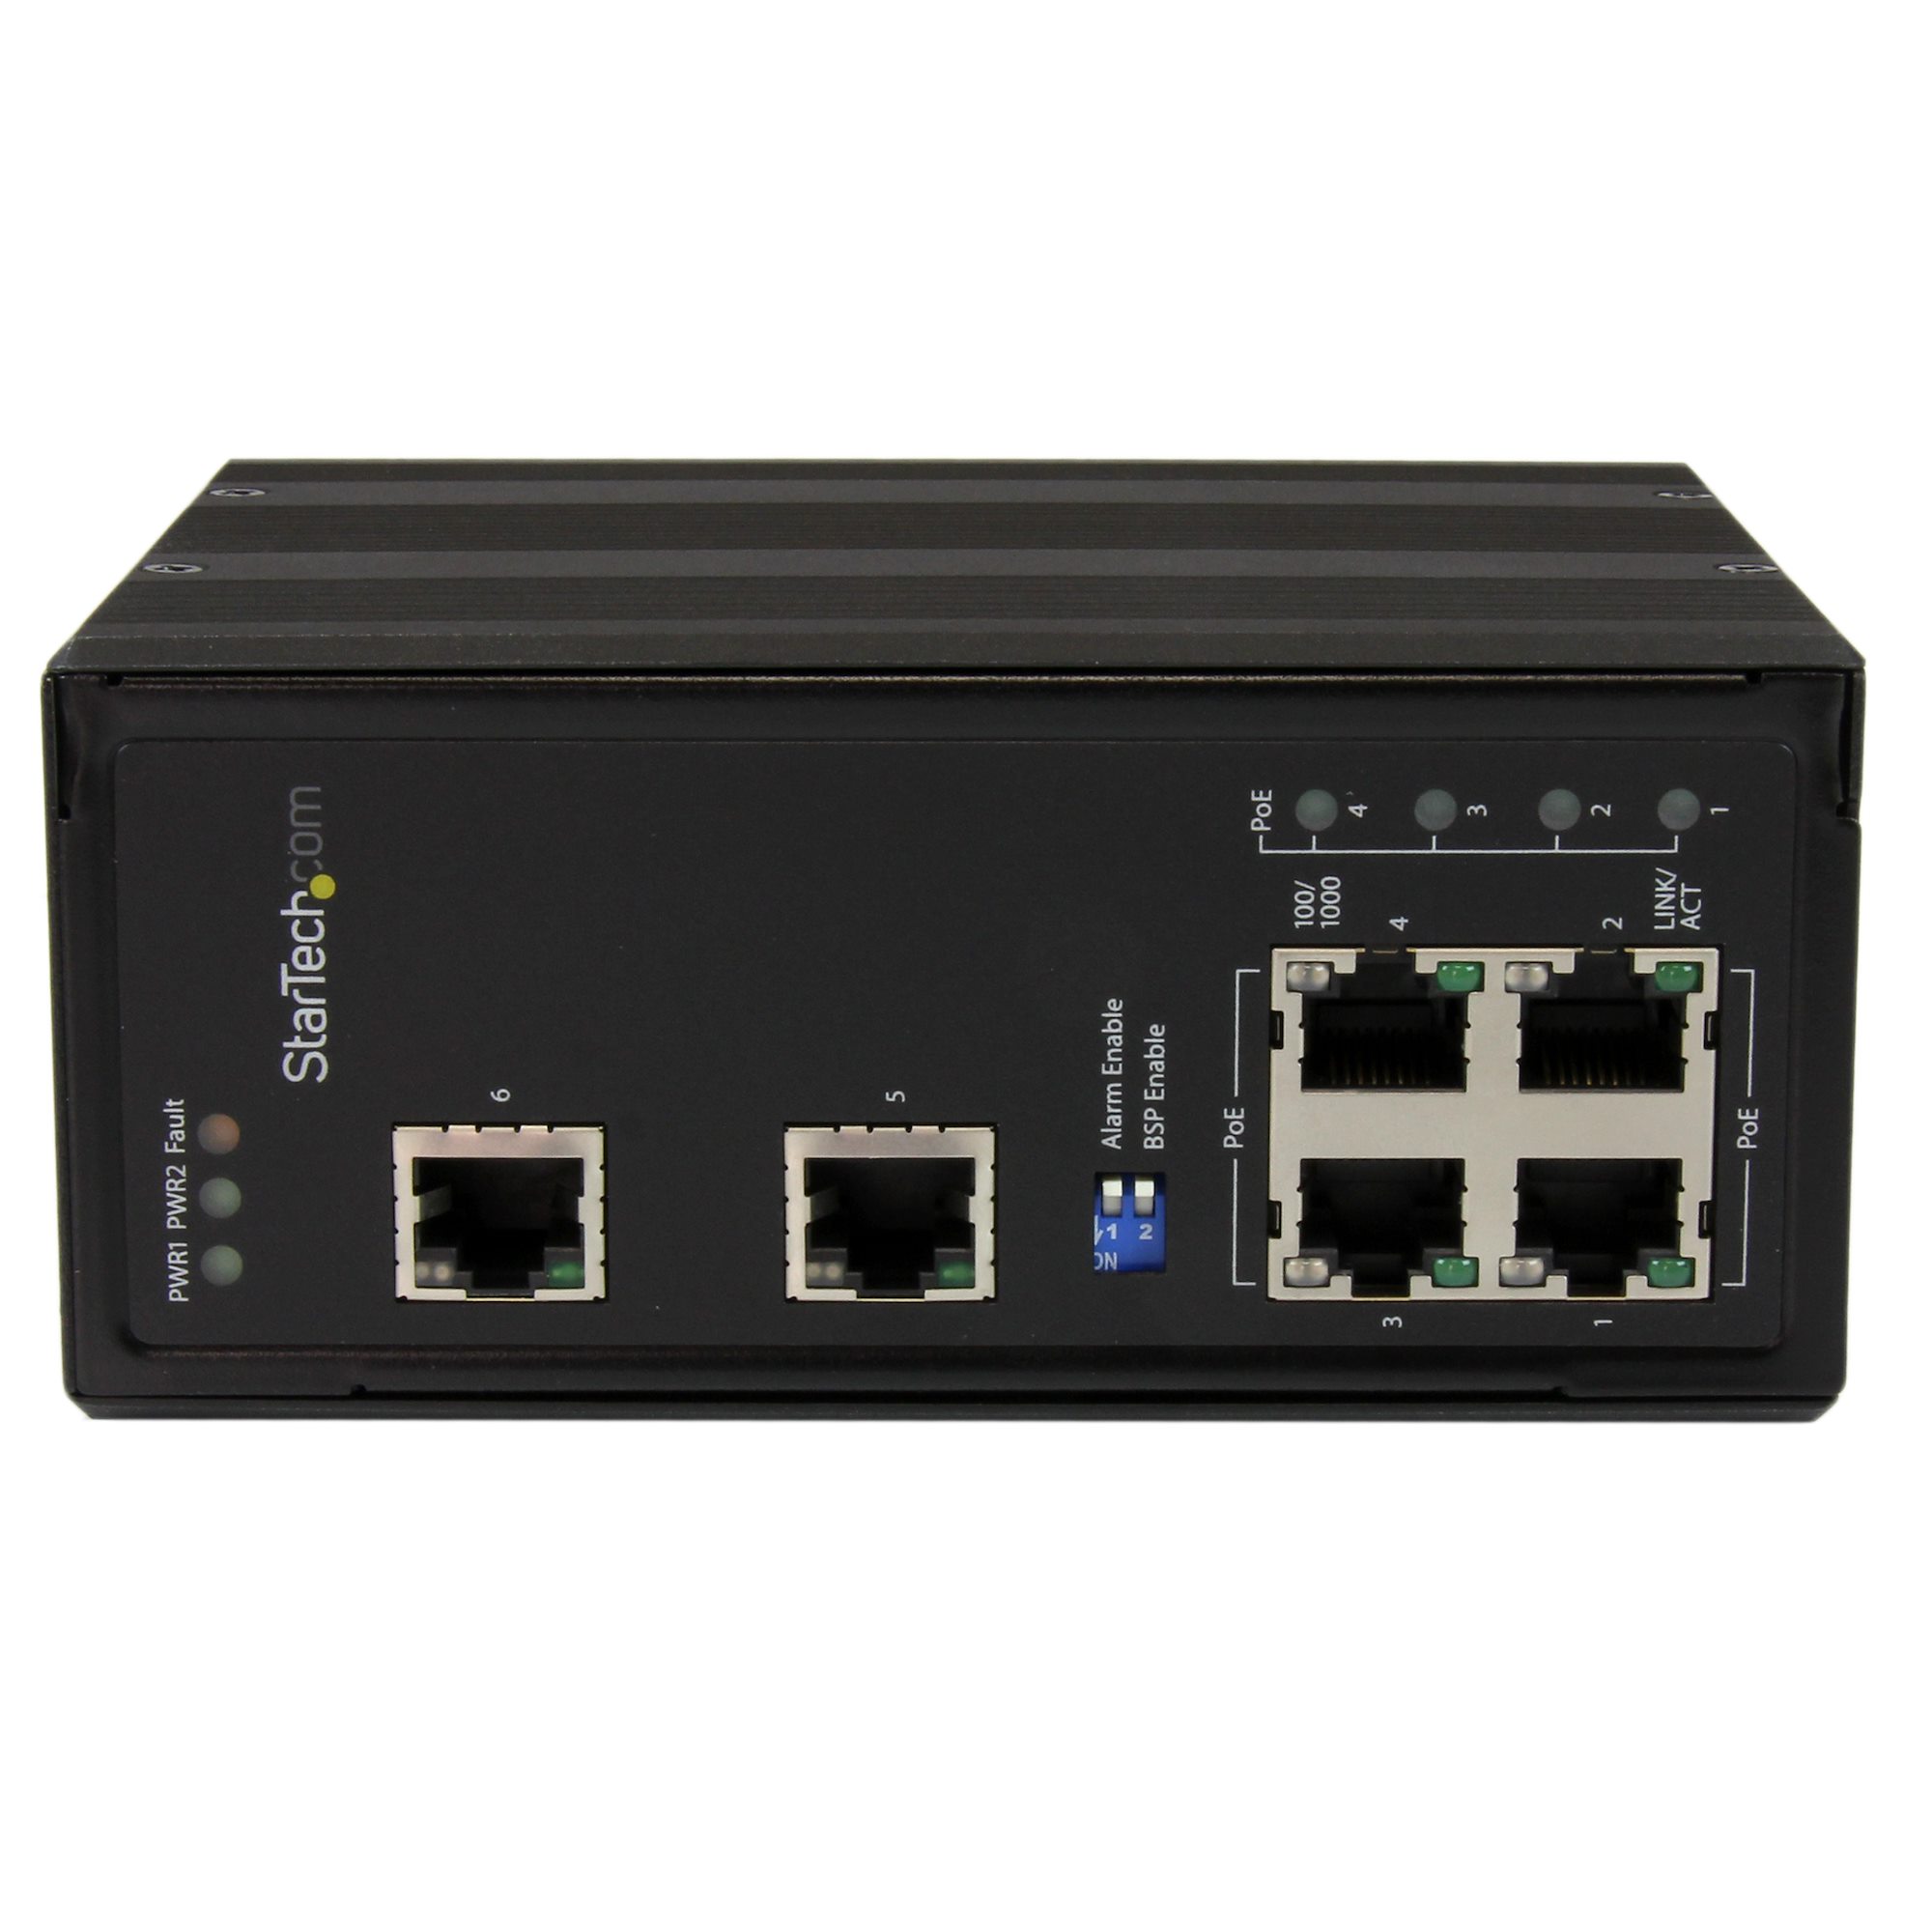 6 Port Unmanaged Industrial Gigabit Ethernet Switch w/ 4 PoE+ Ports and  Voltage Regulation - DIN Rail / Wall-Mountable